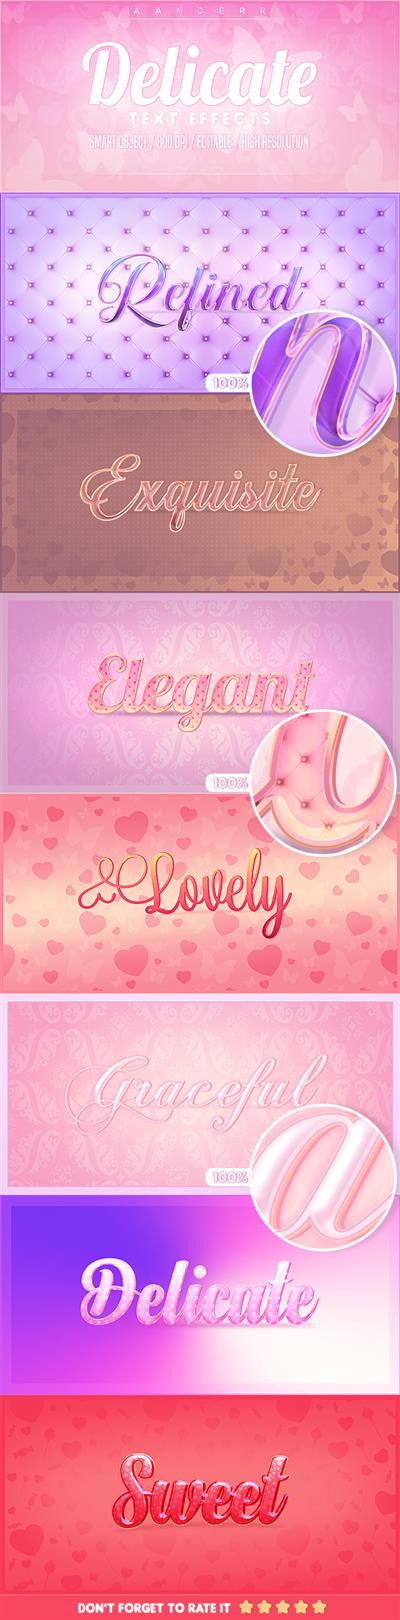 Delicate Photoshop Text Effects 22931110